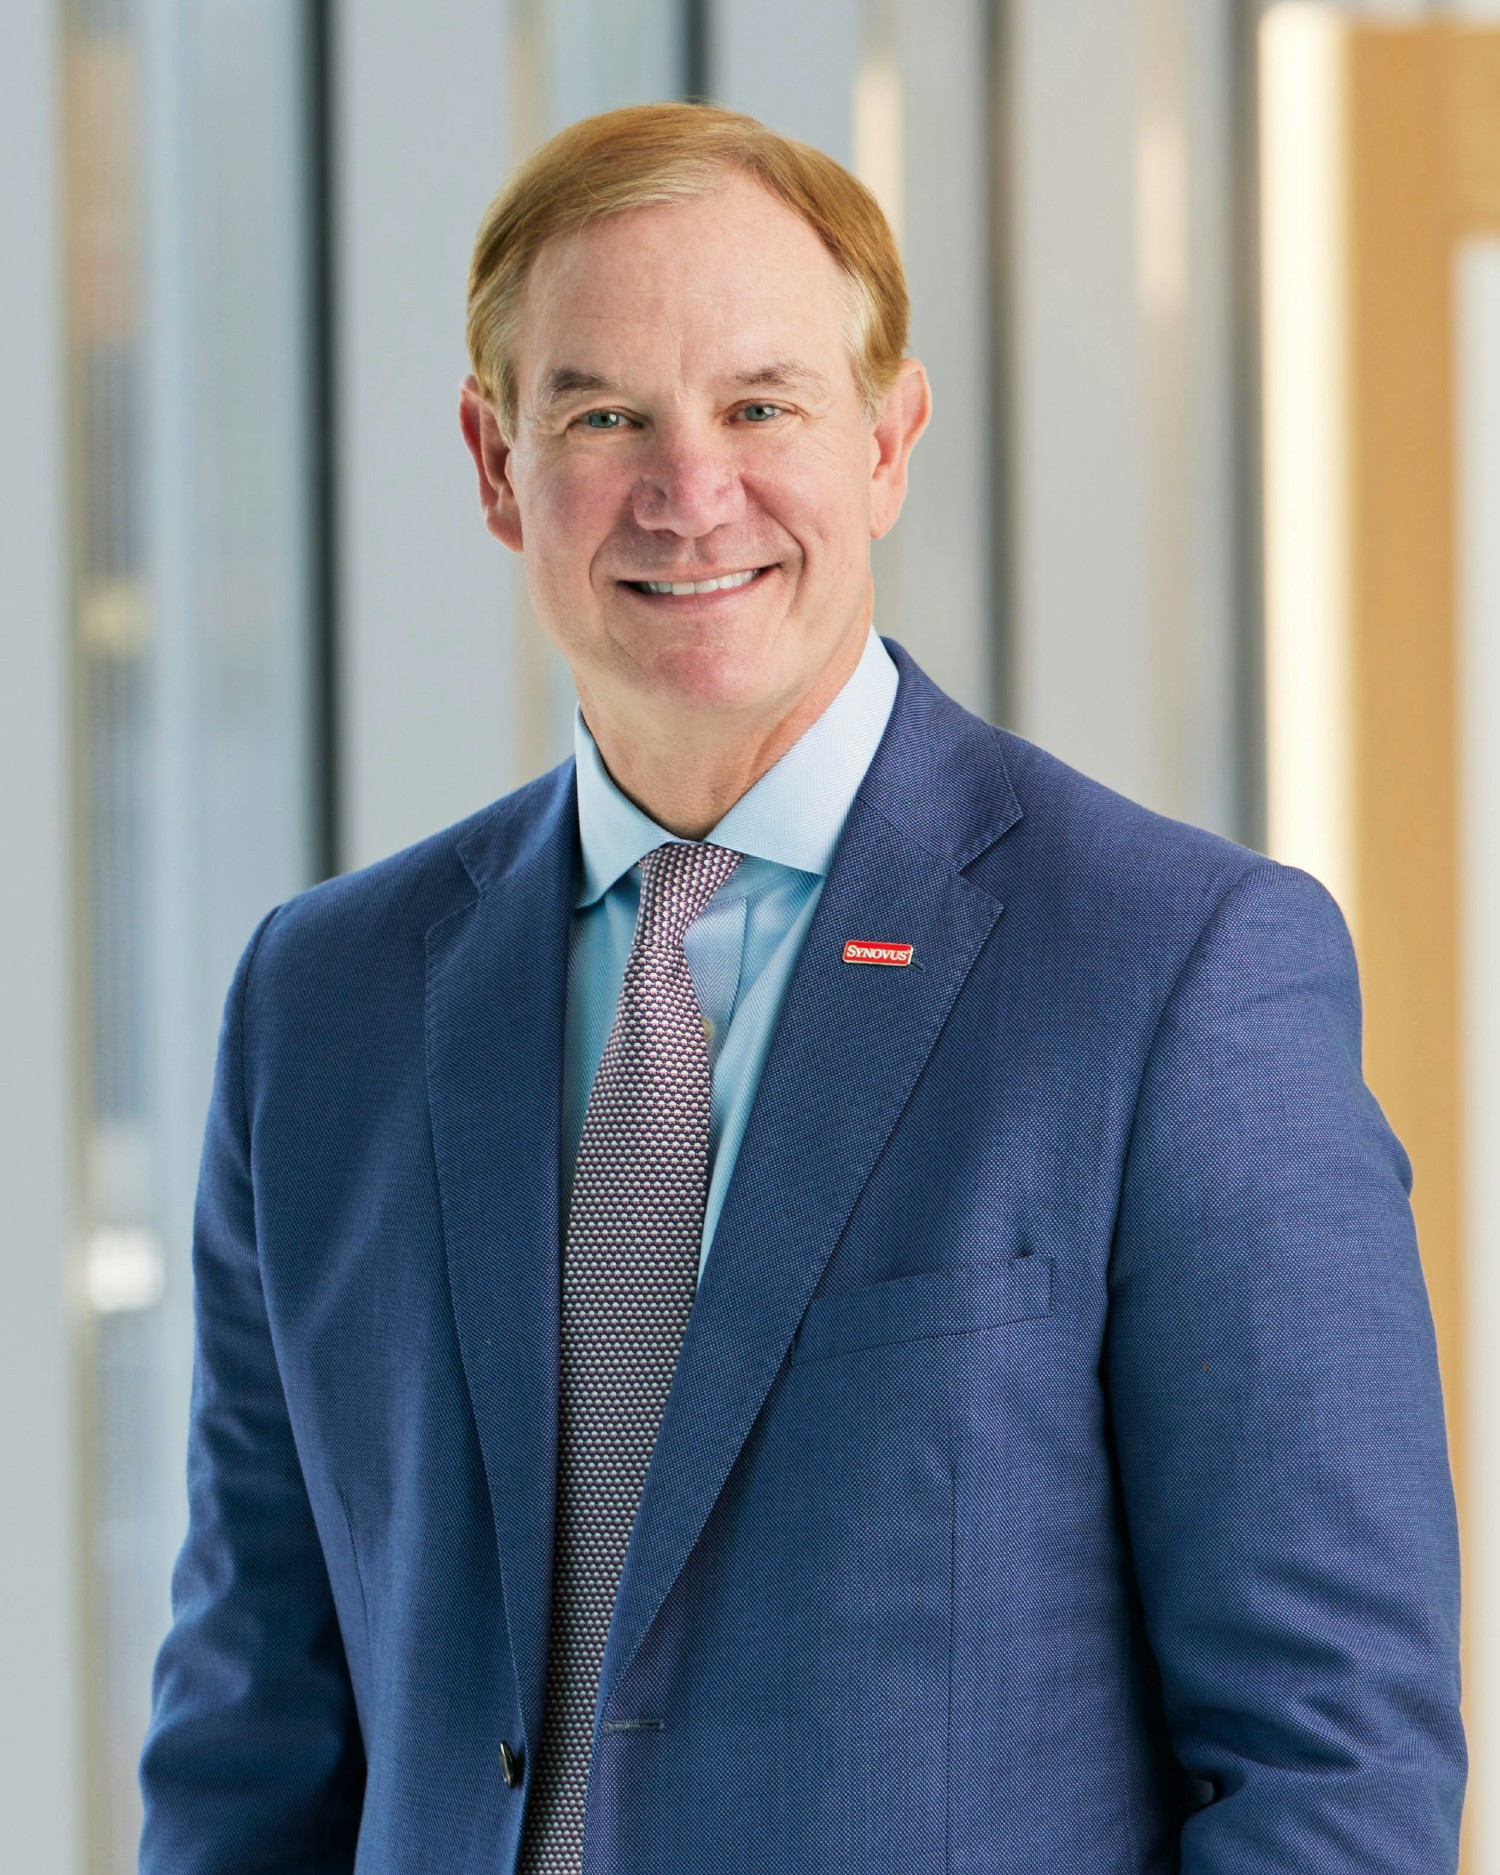 Synovus Chairman, CEO and President Kevin Blair